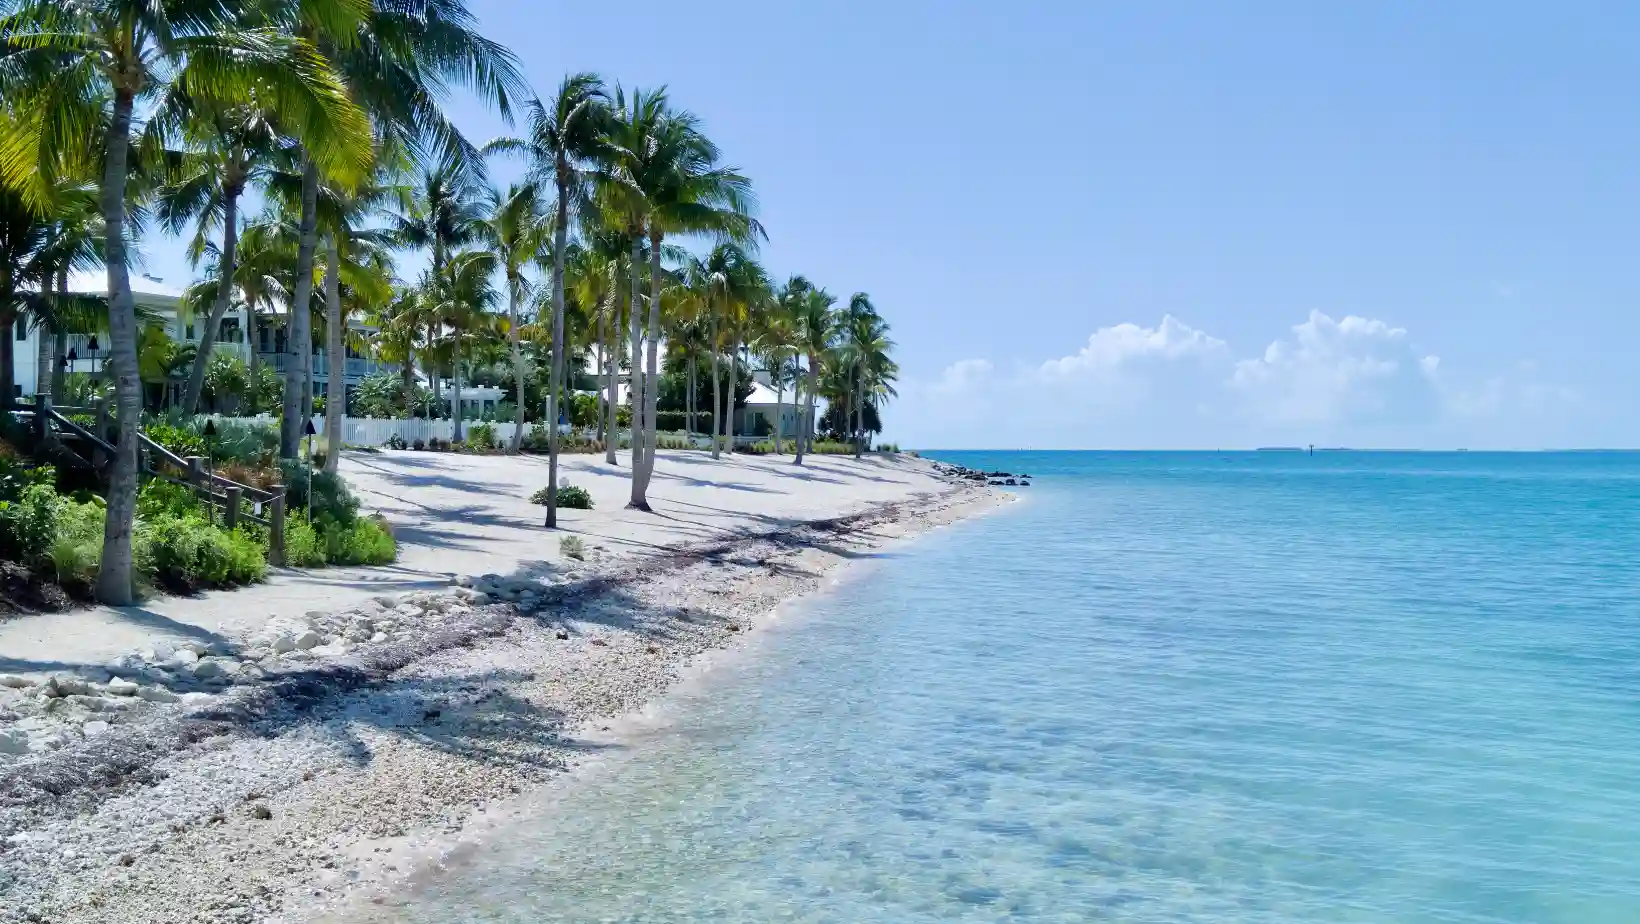 Key West Beach Key West vs Siesta Key for a Vacation? An Honest and In-Depth Comparison!